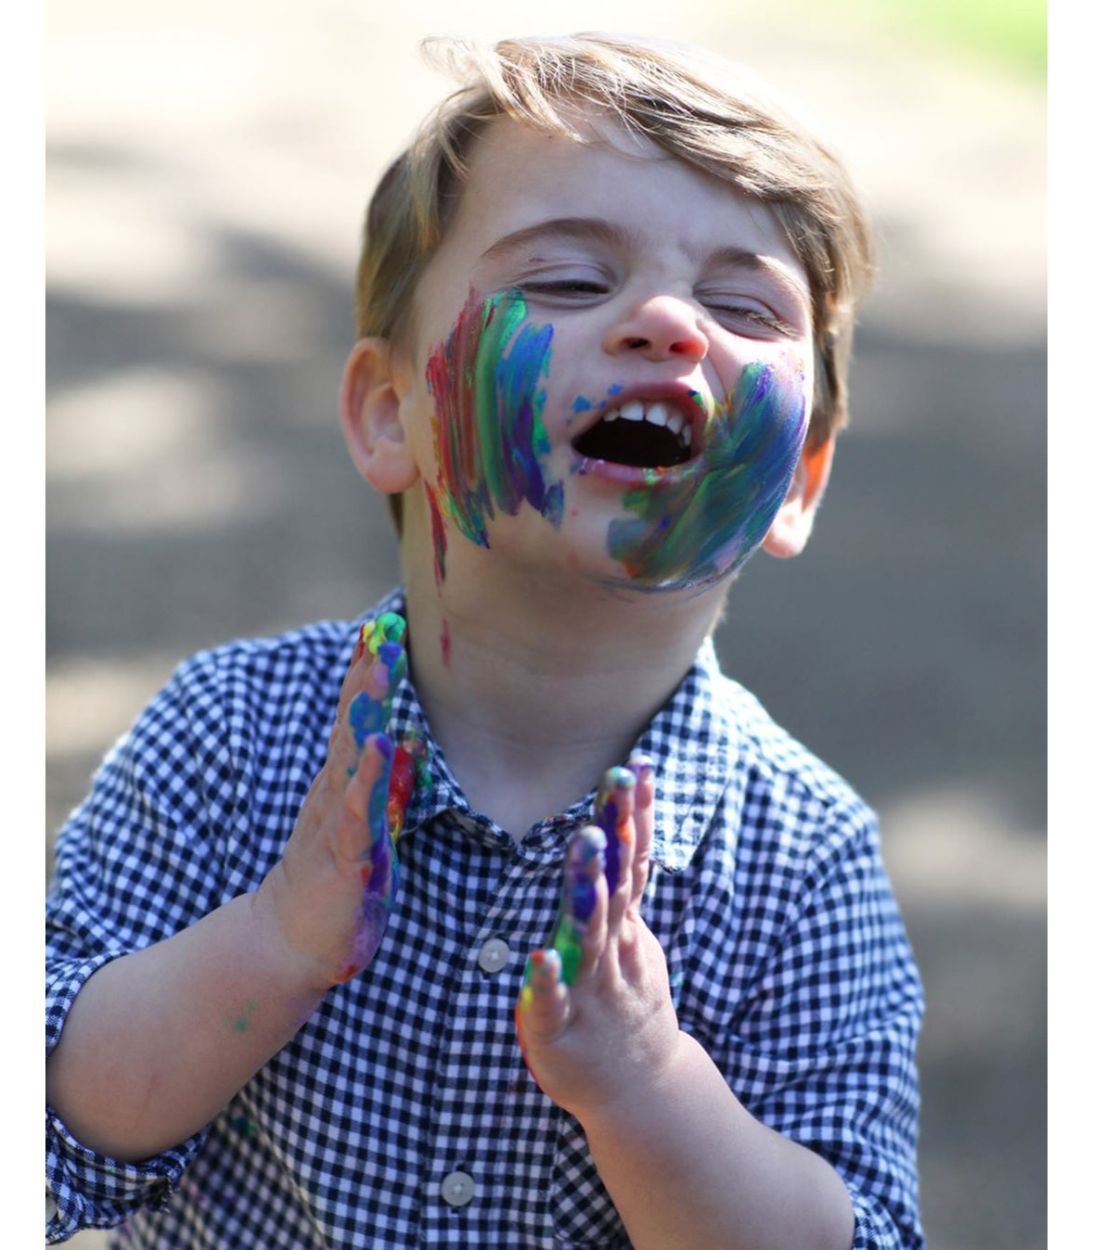 A picture of Prince Louis with paint all over his face